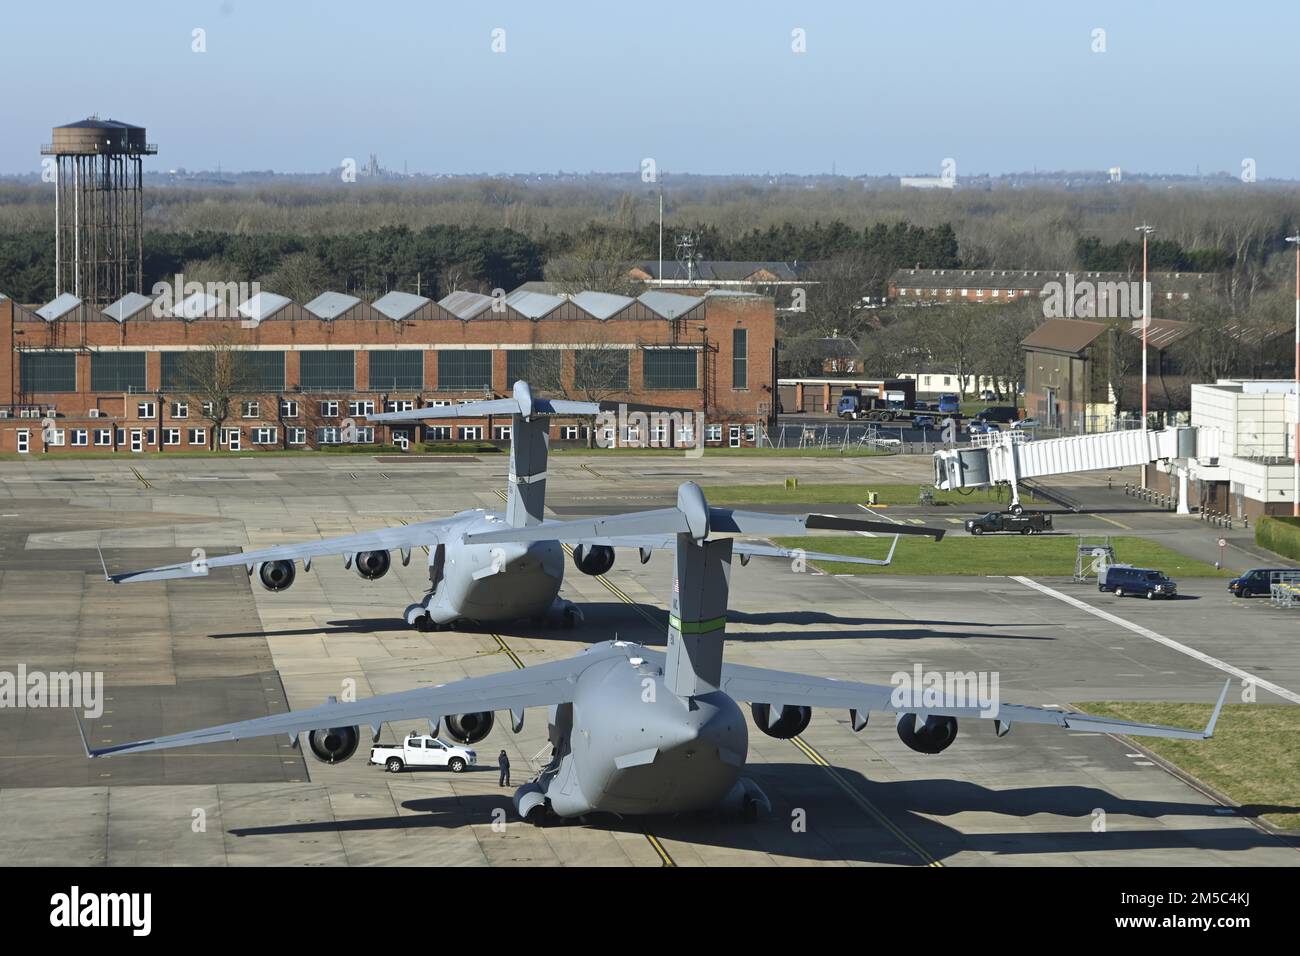 Two U.S. Air Force C-17 Globemaster III aircraft assigned to the 60th Air Mobility Wing, Travis Air Force Base, Calif., and the 62nd Airlift Wing, Joint Base Lewis-McChord, Wash., sit on the flightline after landing at Royal Air Force Mildenhall, England, Feb. 27, 2022. The aircraft landed at RAF Mildenhall after transporting cargo pallets to an air base in Norway. Stock Photo